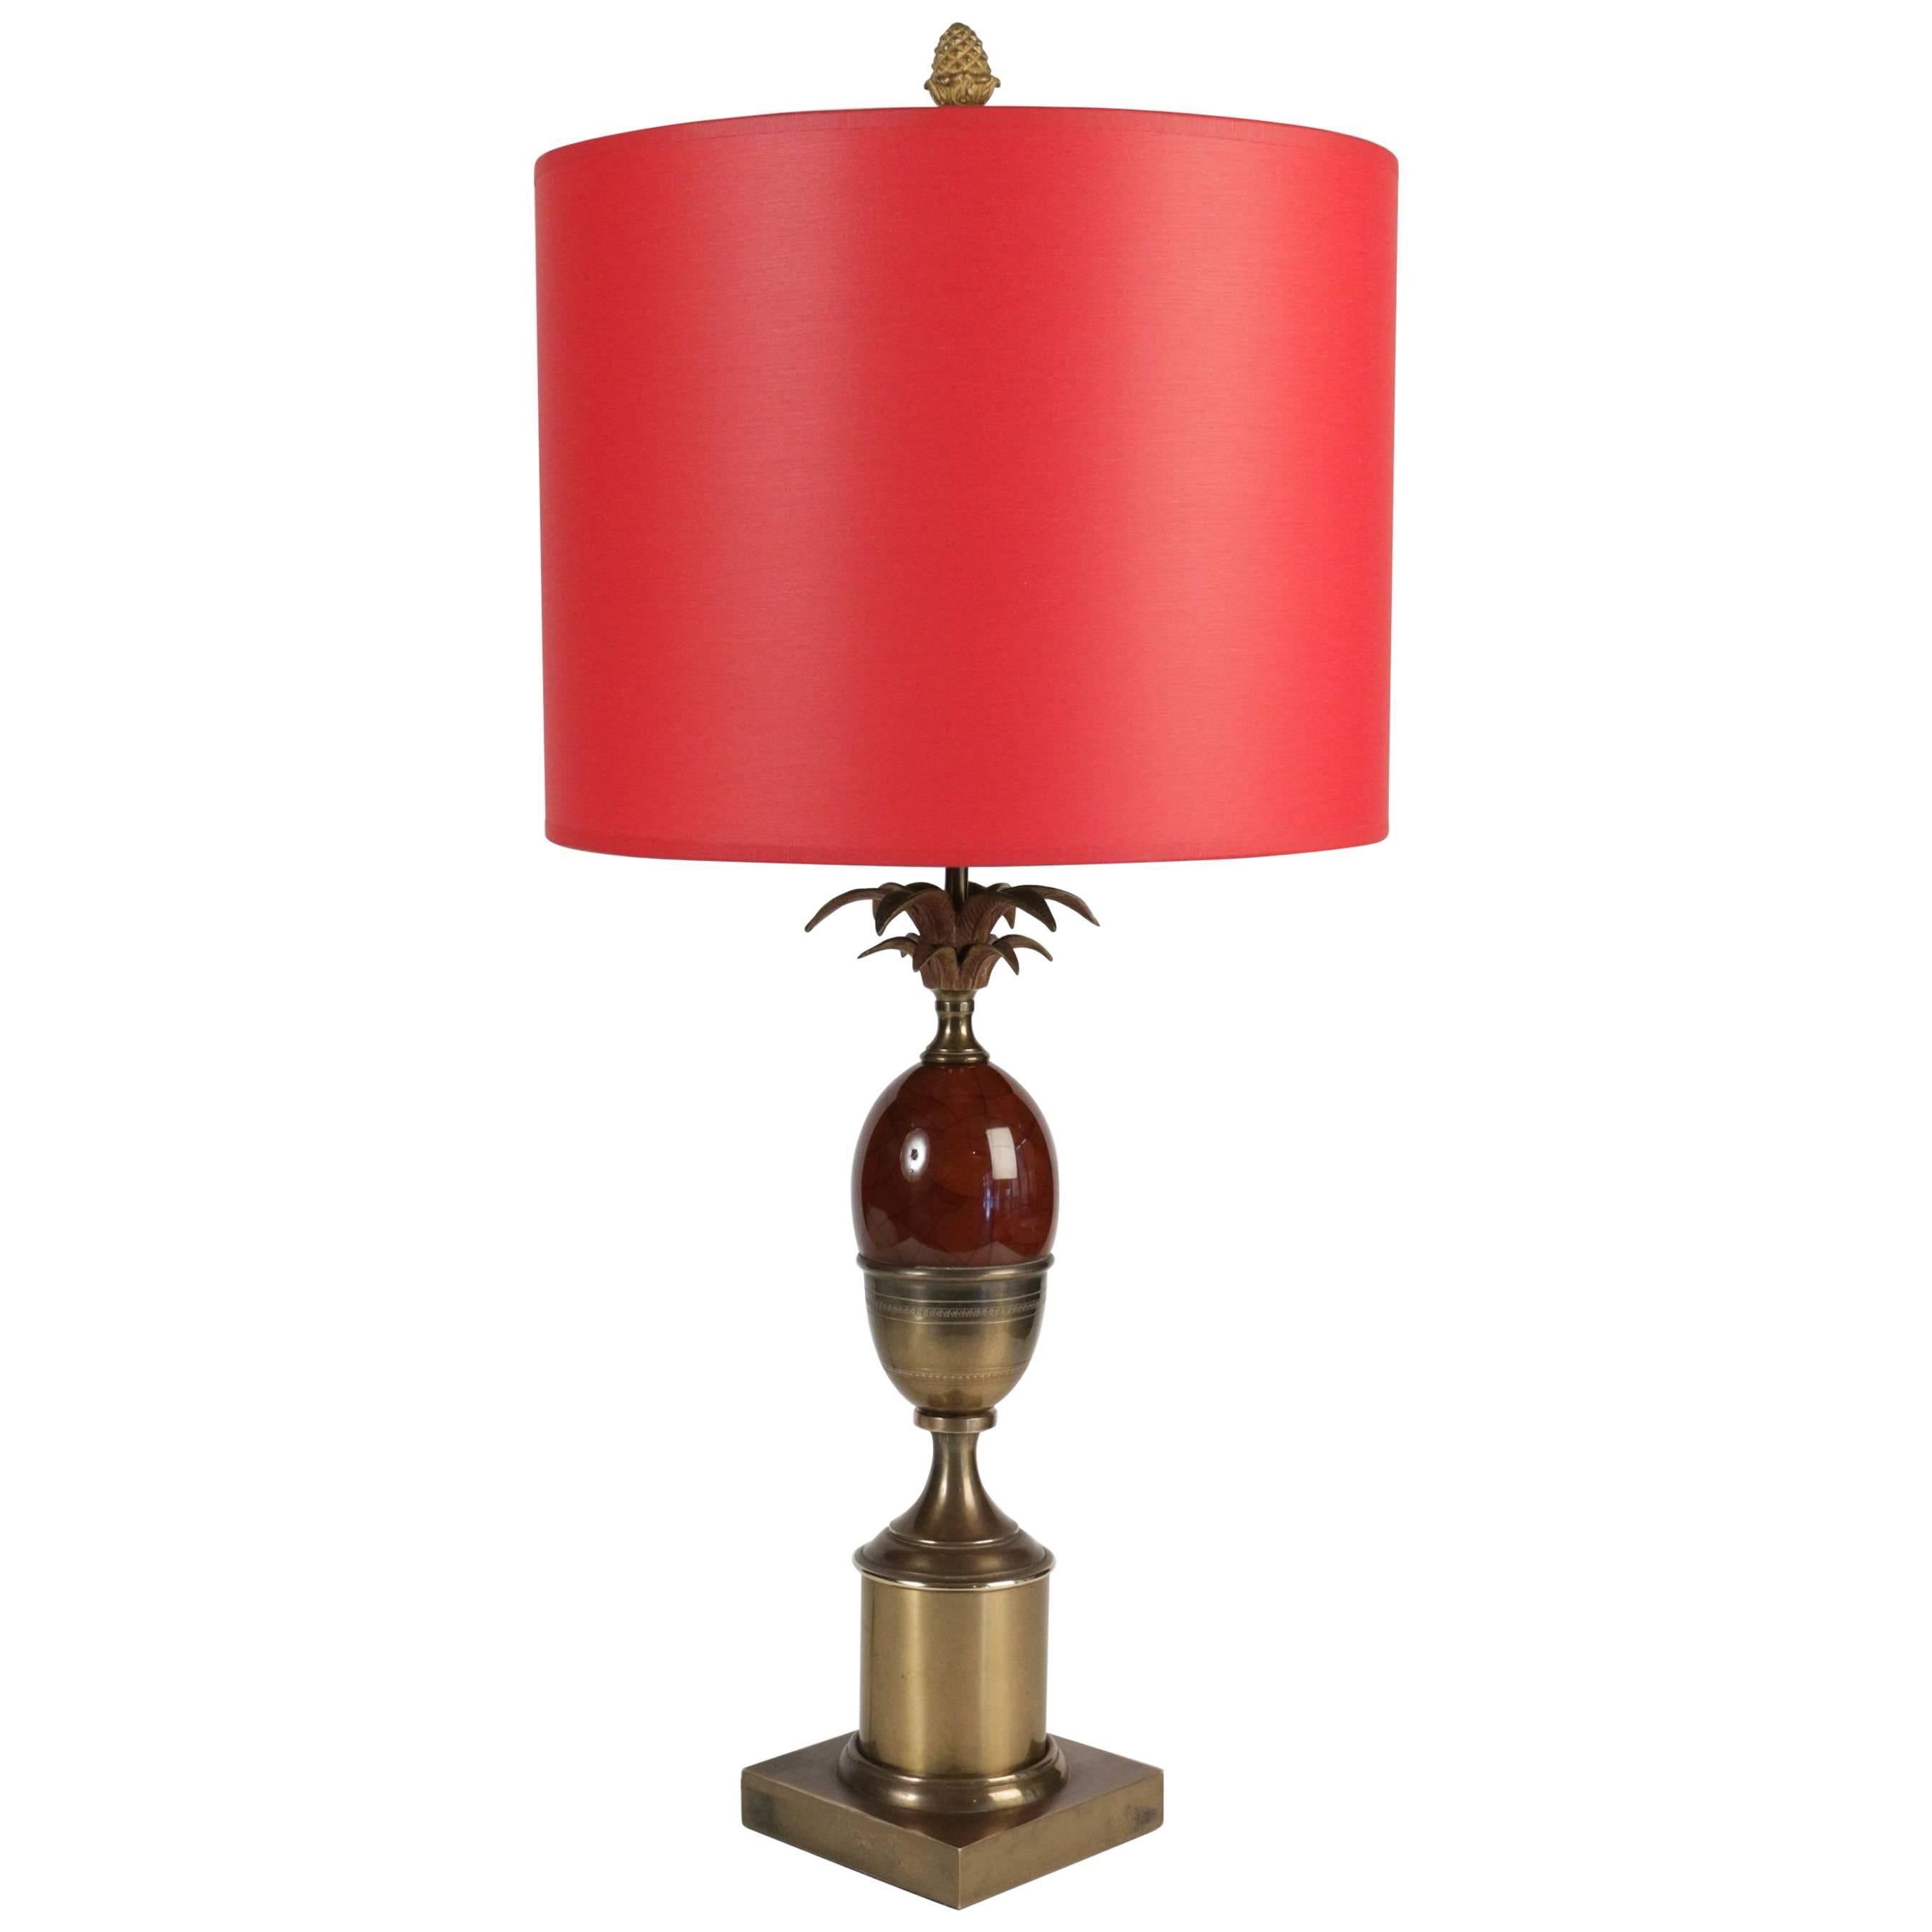 Mid-Century Modern 1960s Red Lamp in Brass and Resin